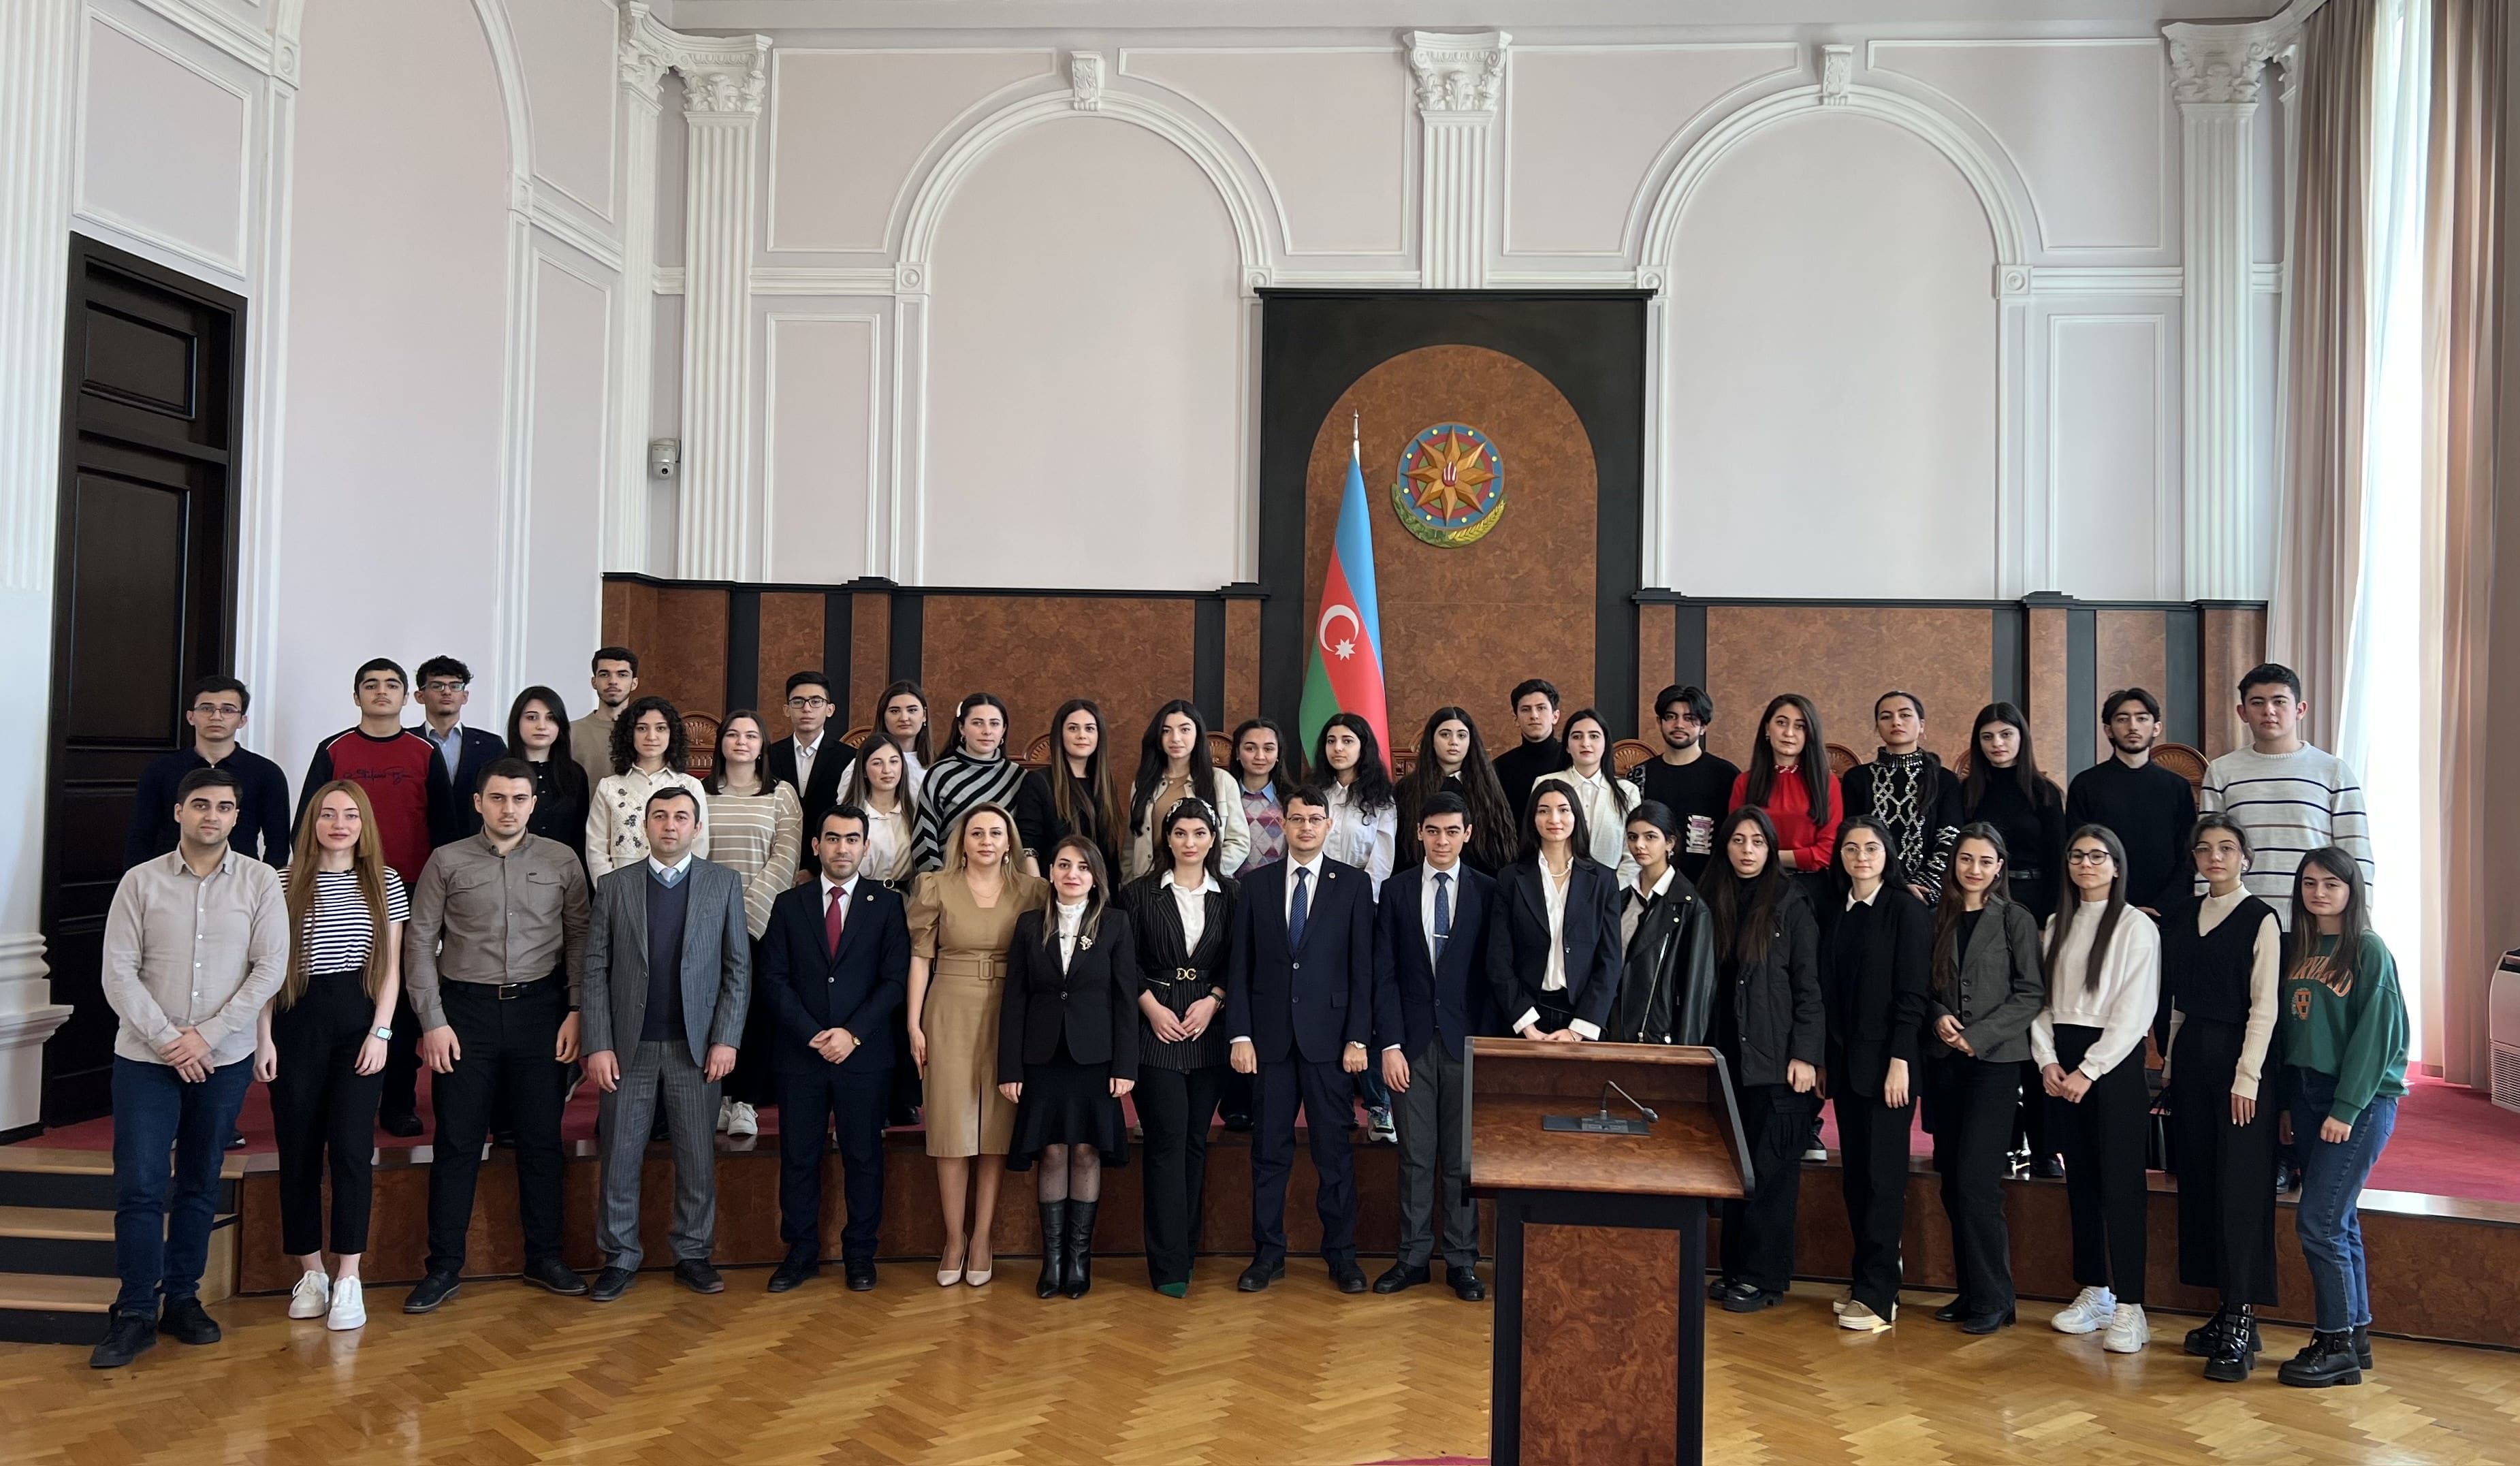 An event for future lawyers was organized in the Constitutional Court together with the Bar Association and the Youth Fund